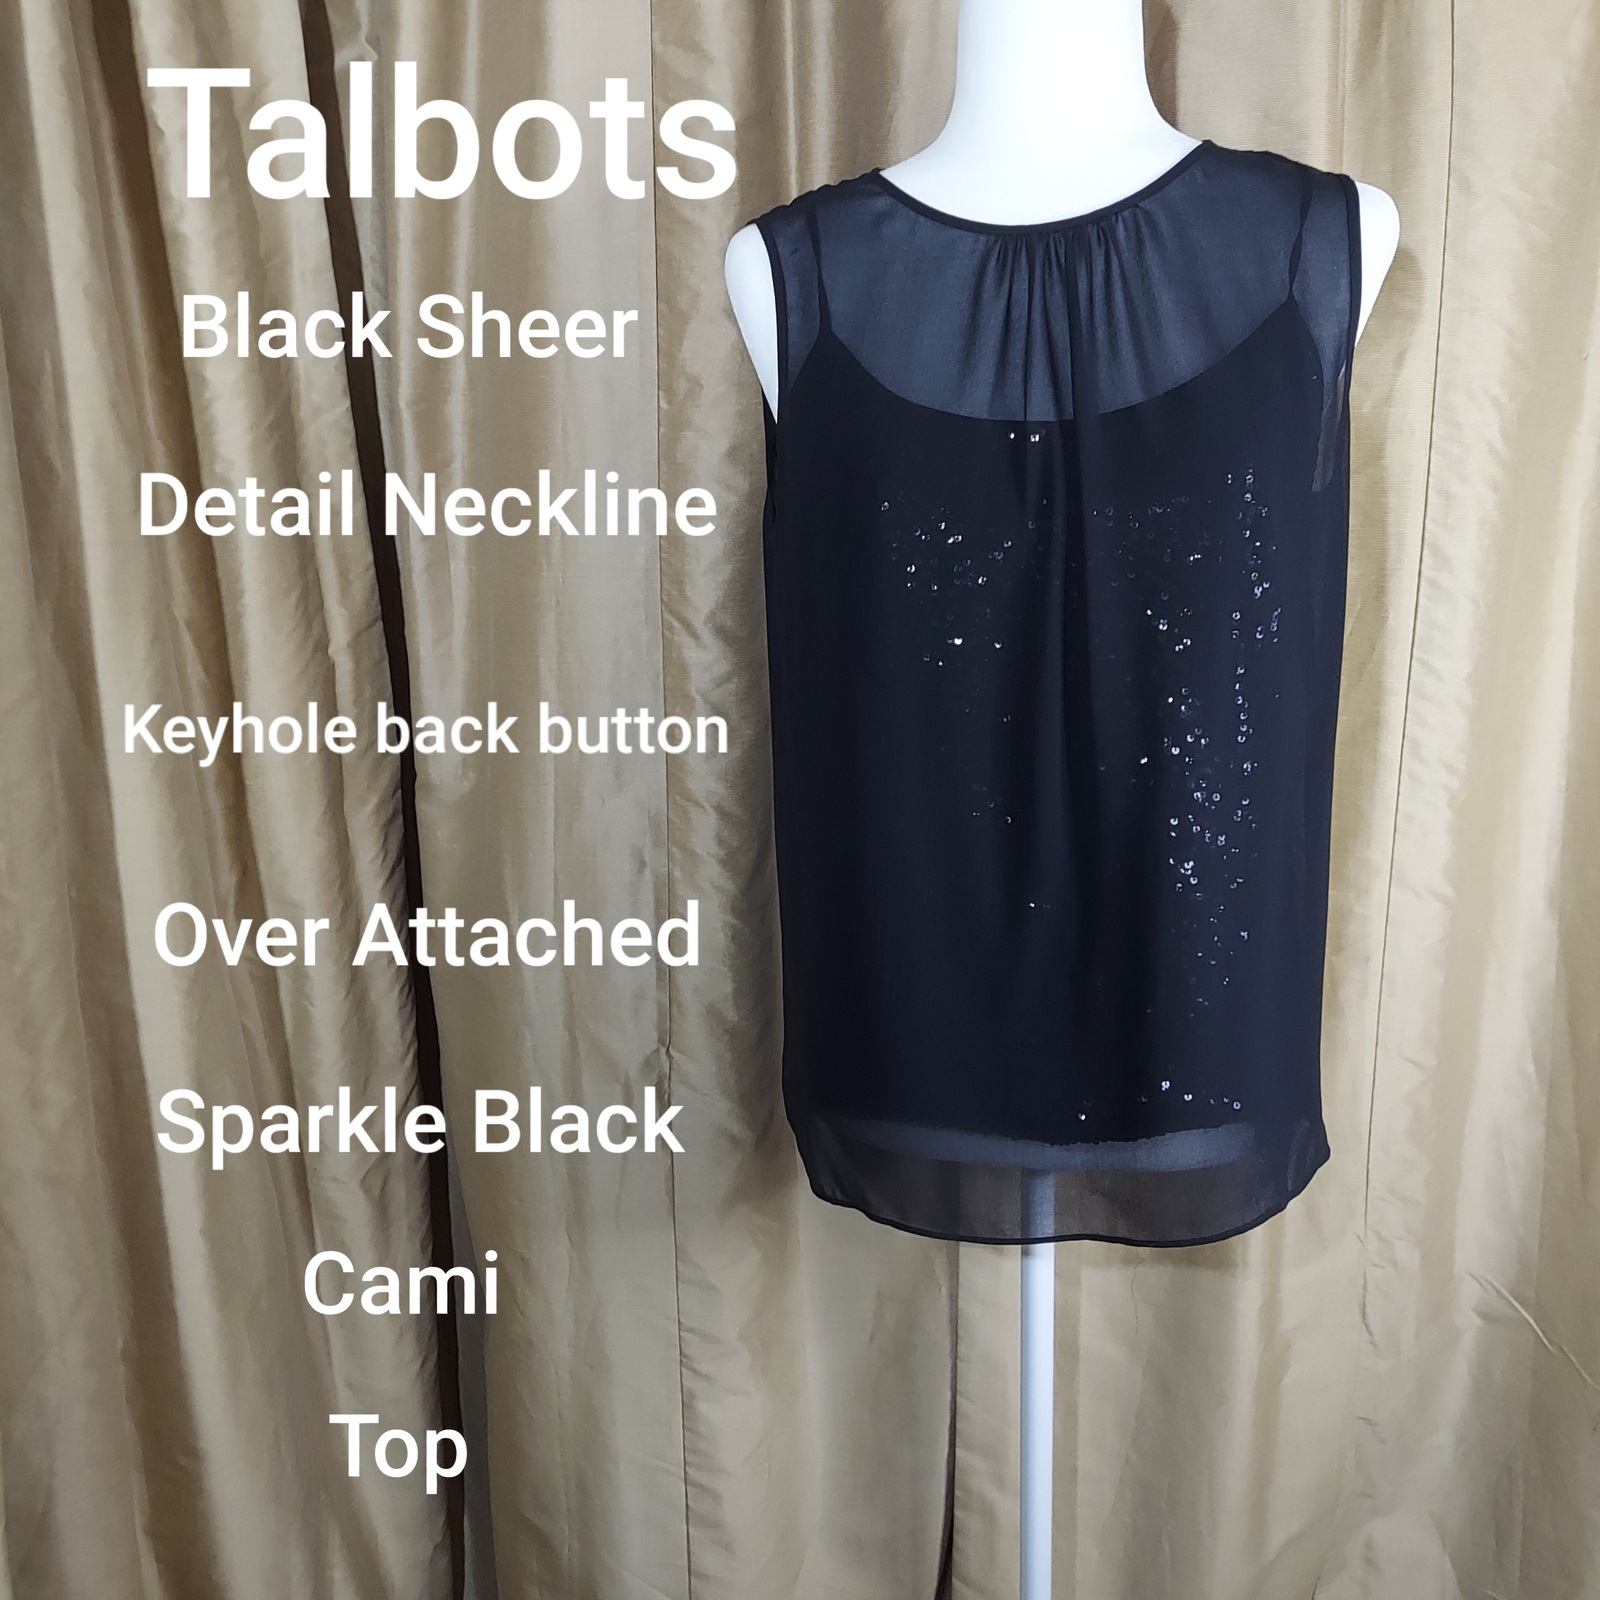 Primary image for Talbots Black sheer over attached sparkle cami size 8